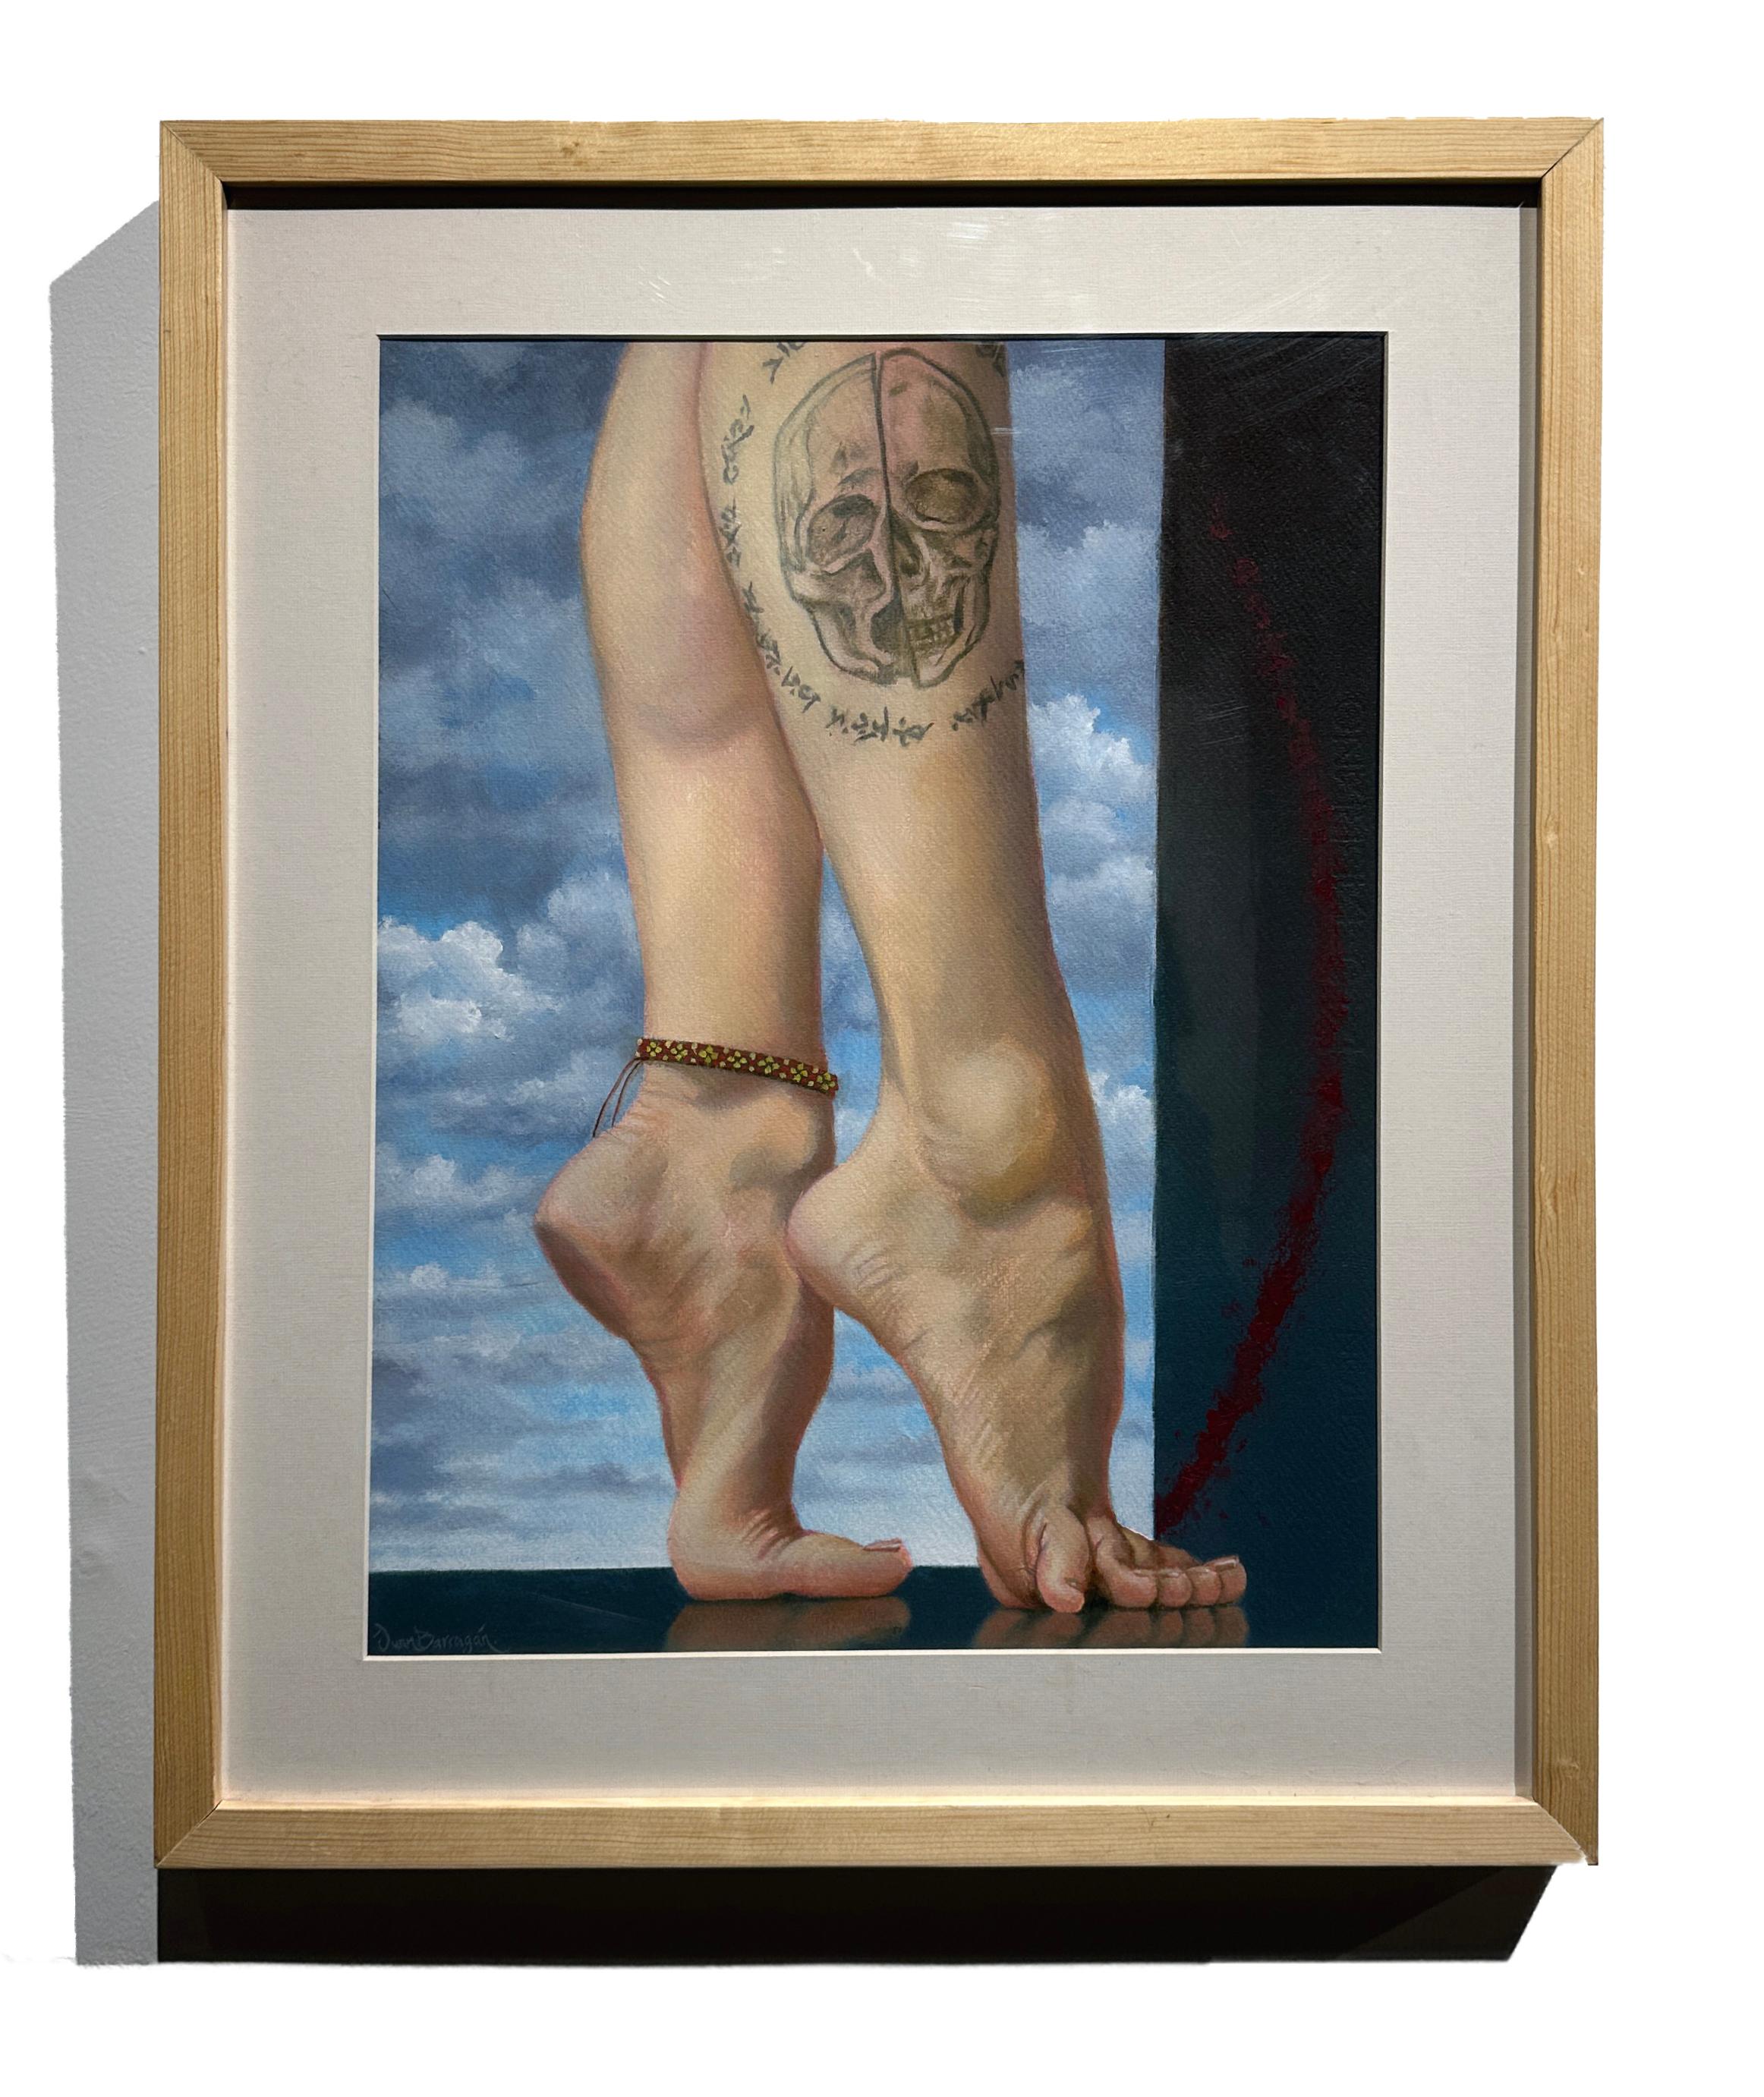 Exegesis - Dancer's Legs Emblazoned with a Skull Tattoo, Oil & Acrylic on Paper 1